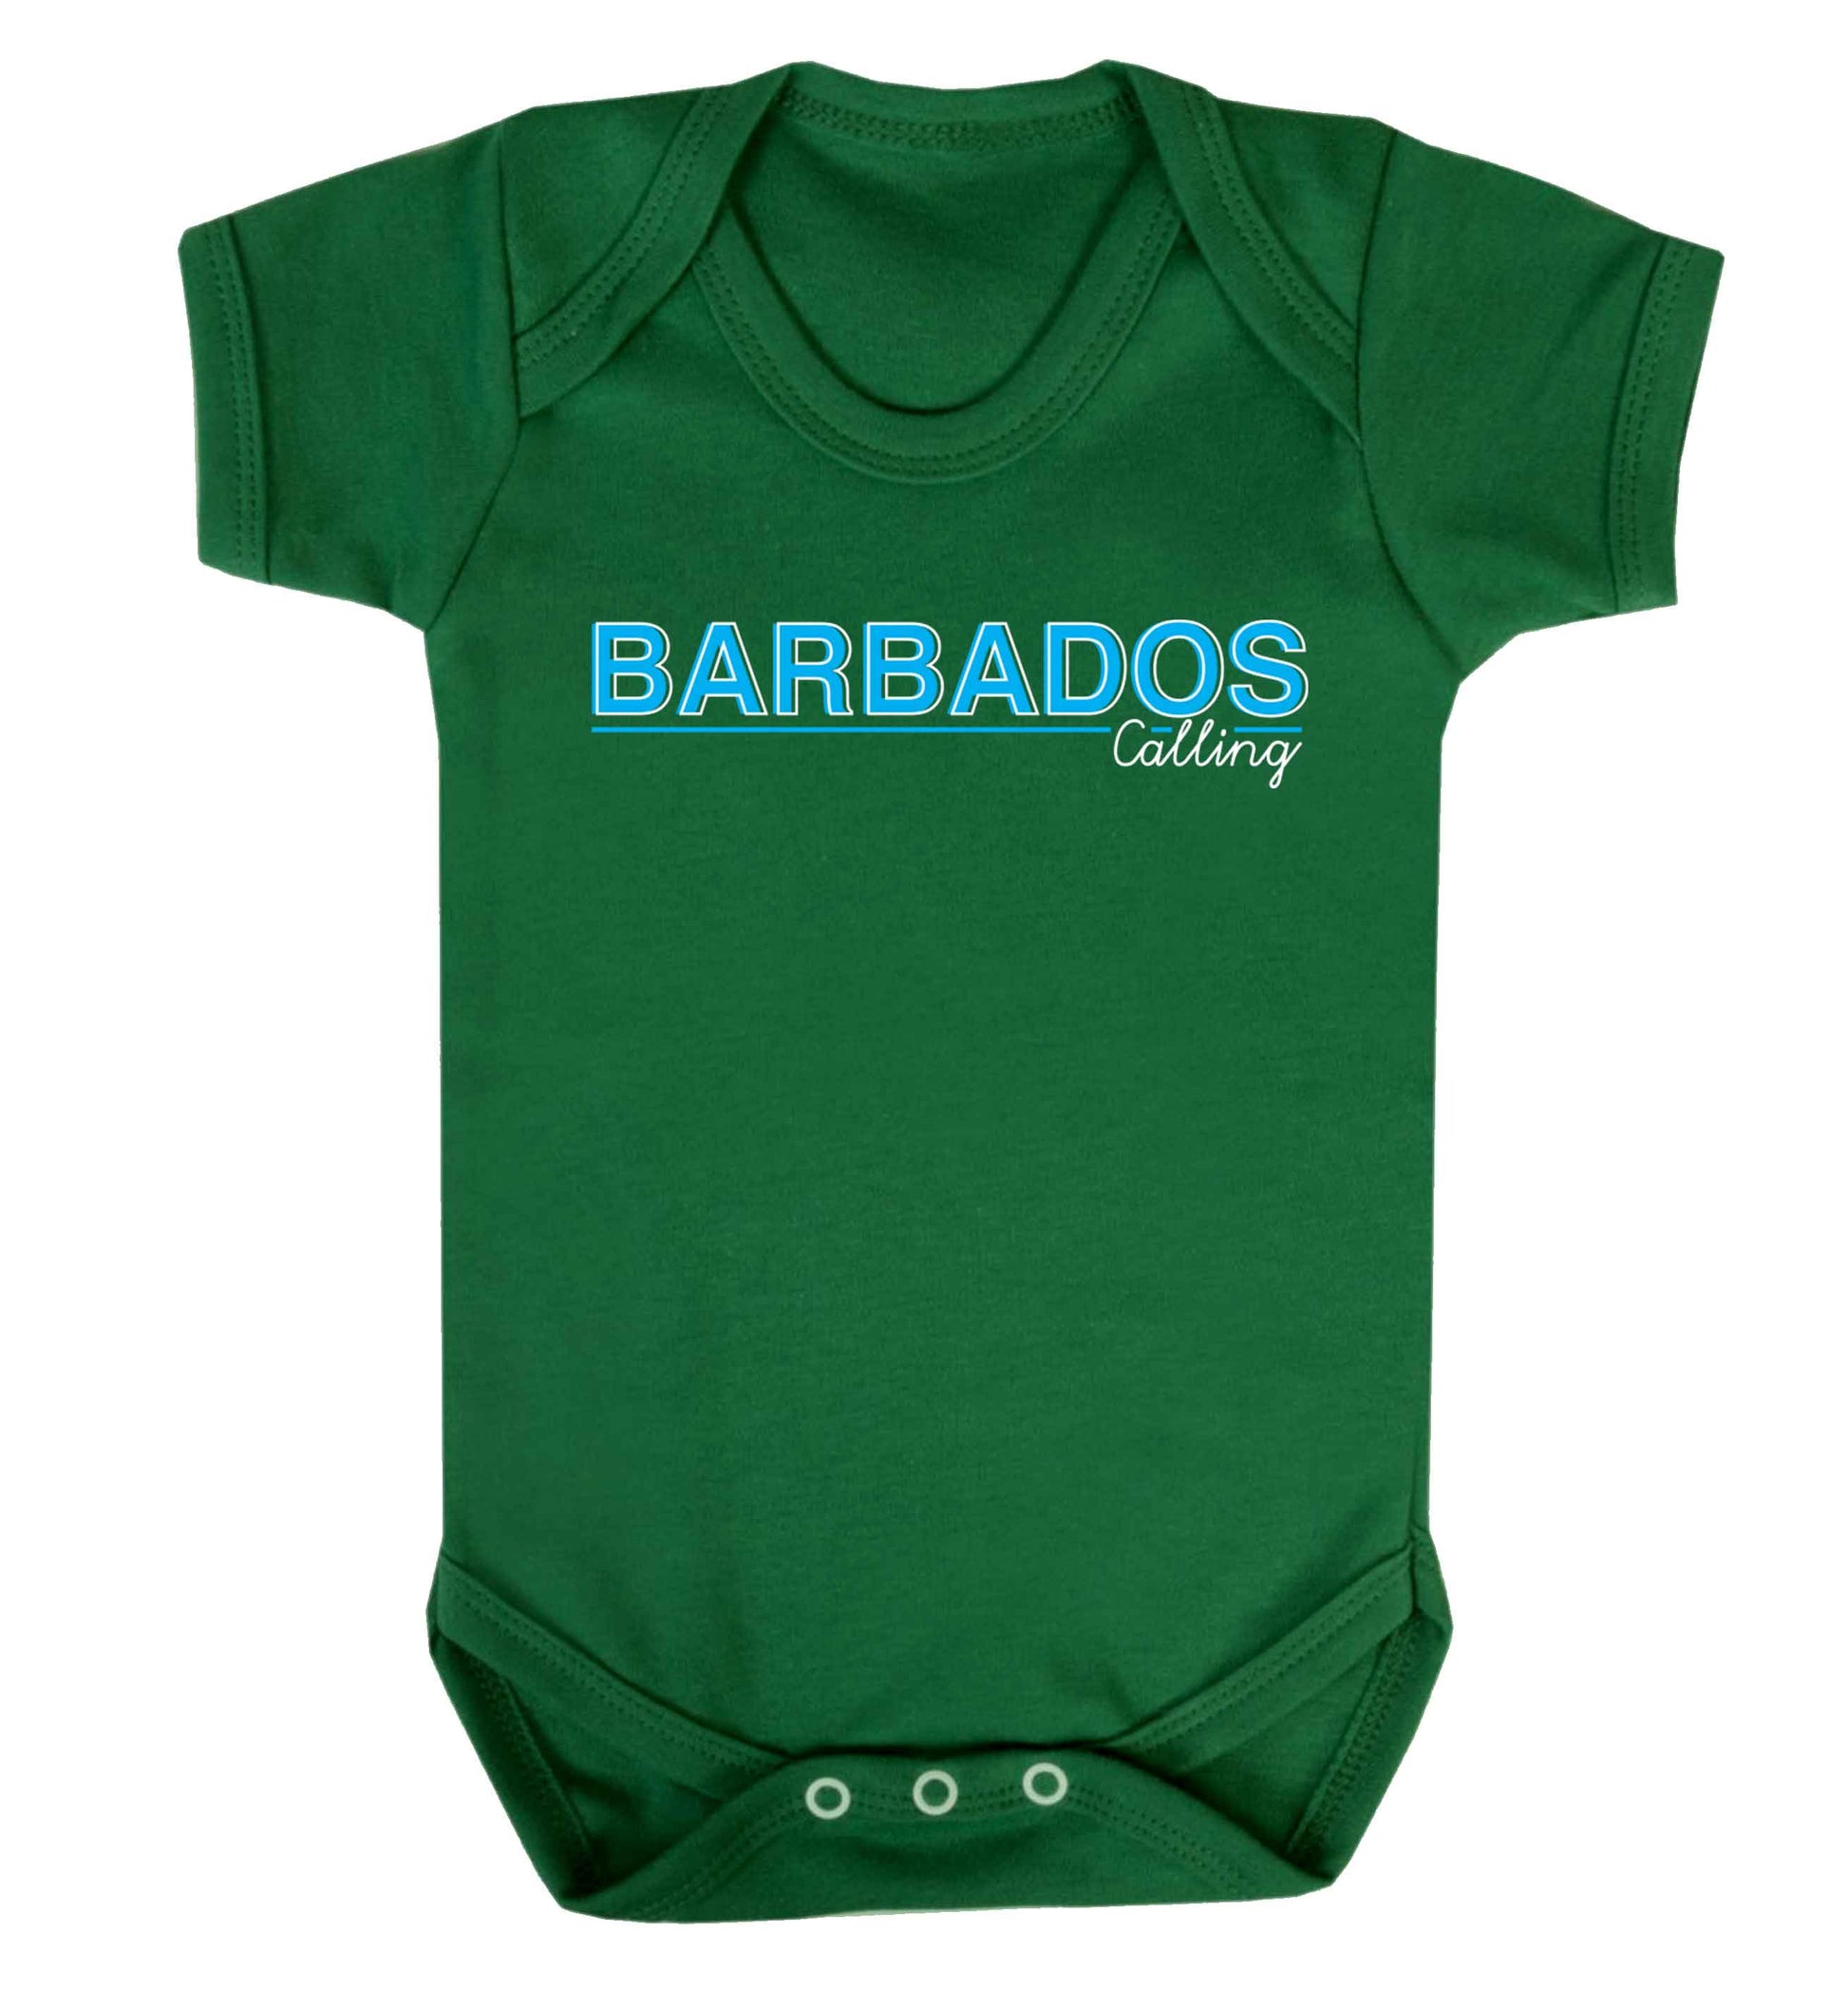 Barbados calling Baby Vest green 18-24 months